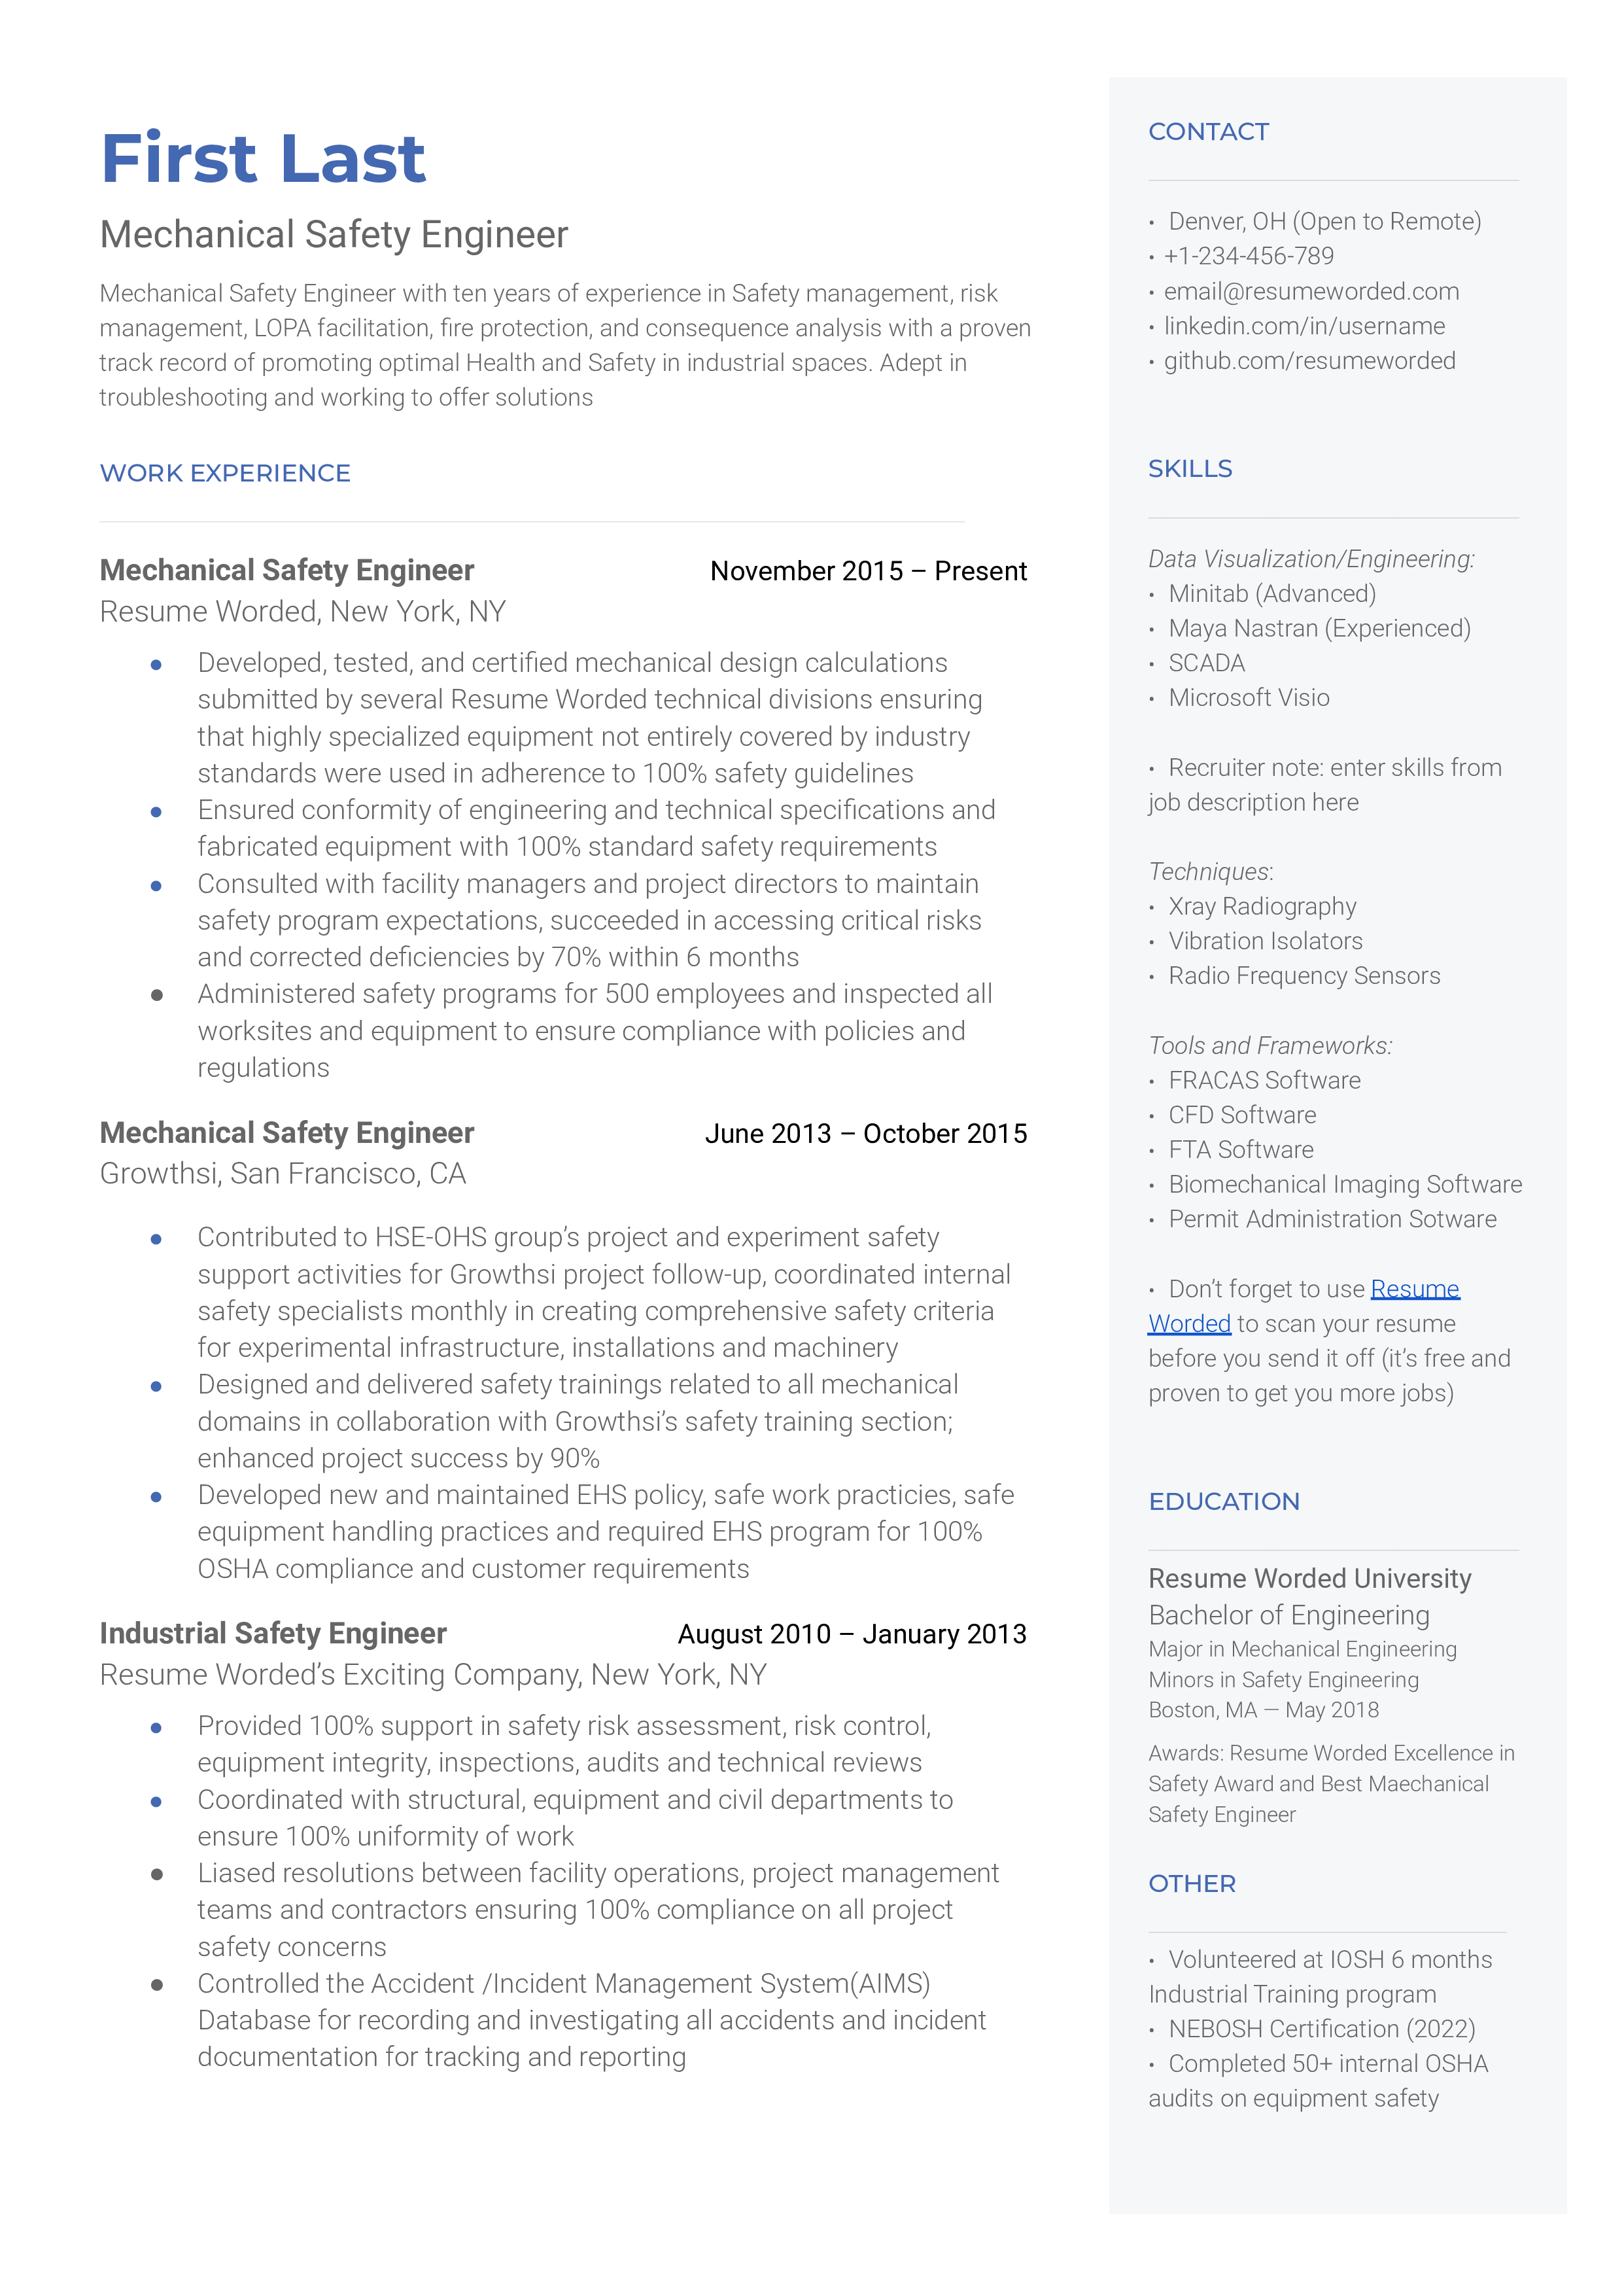 A CV screenshot for a Mechanical Safety Engineer role showcasing experience with safety regulations and problem-solving skills.